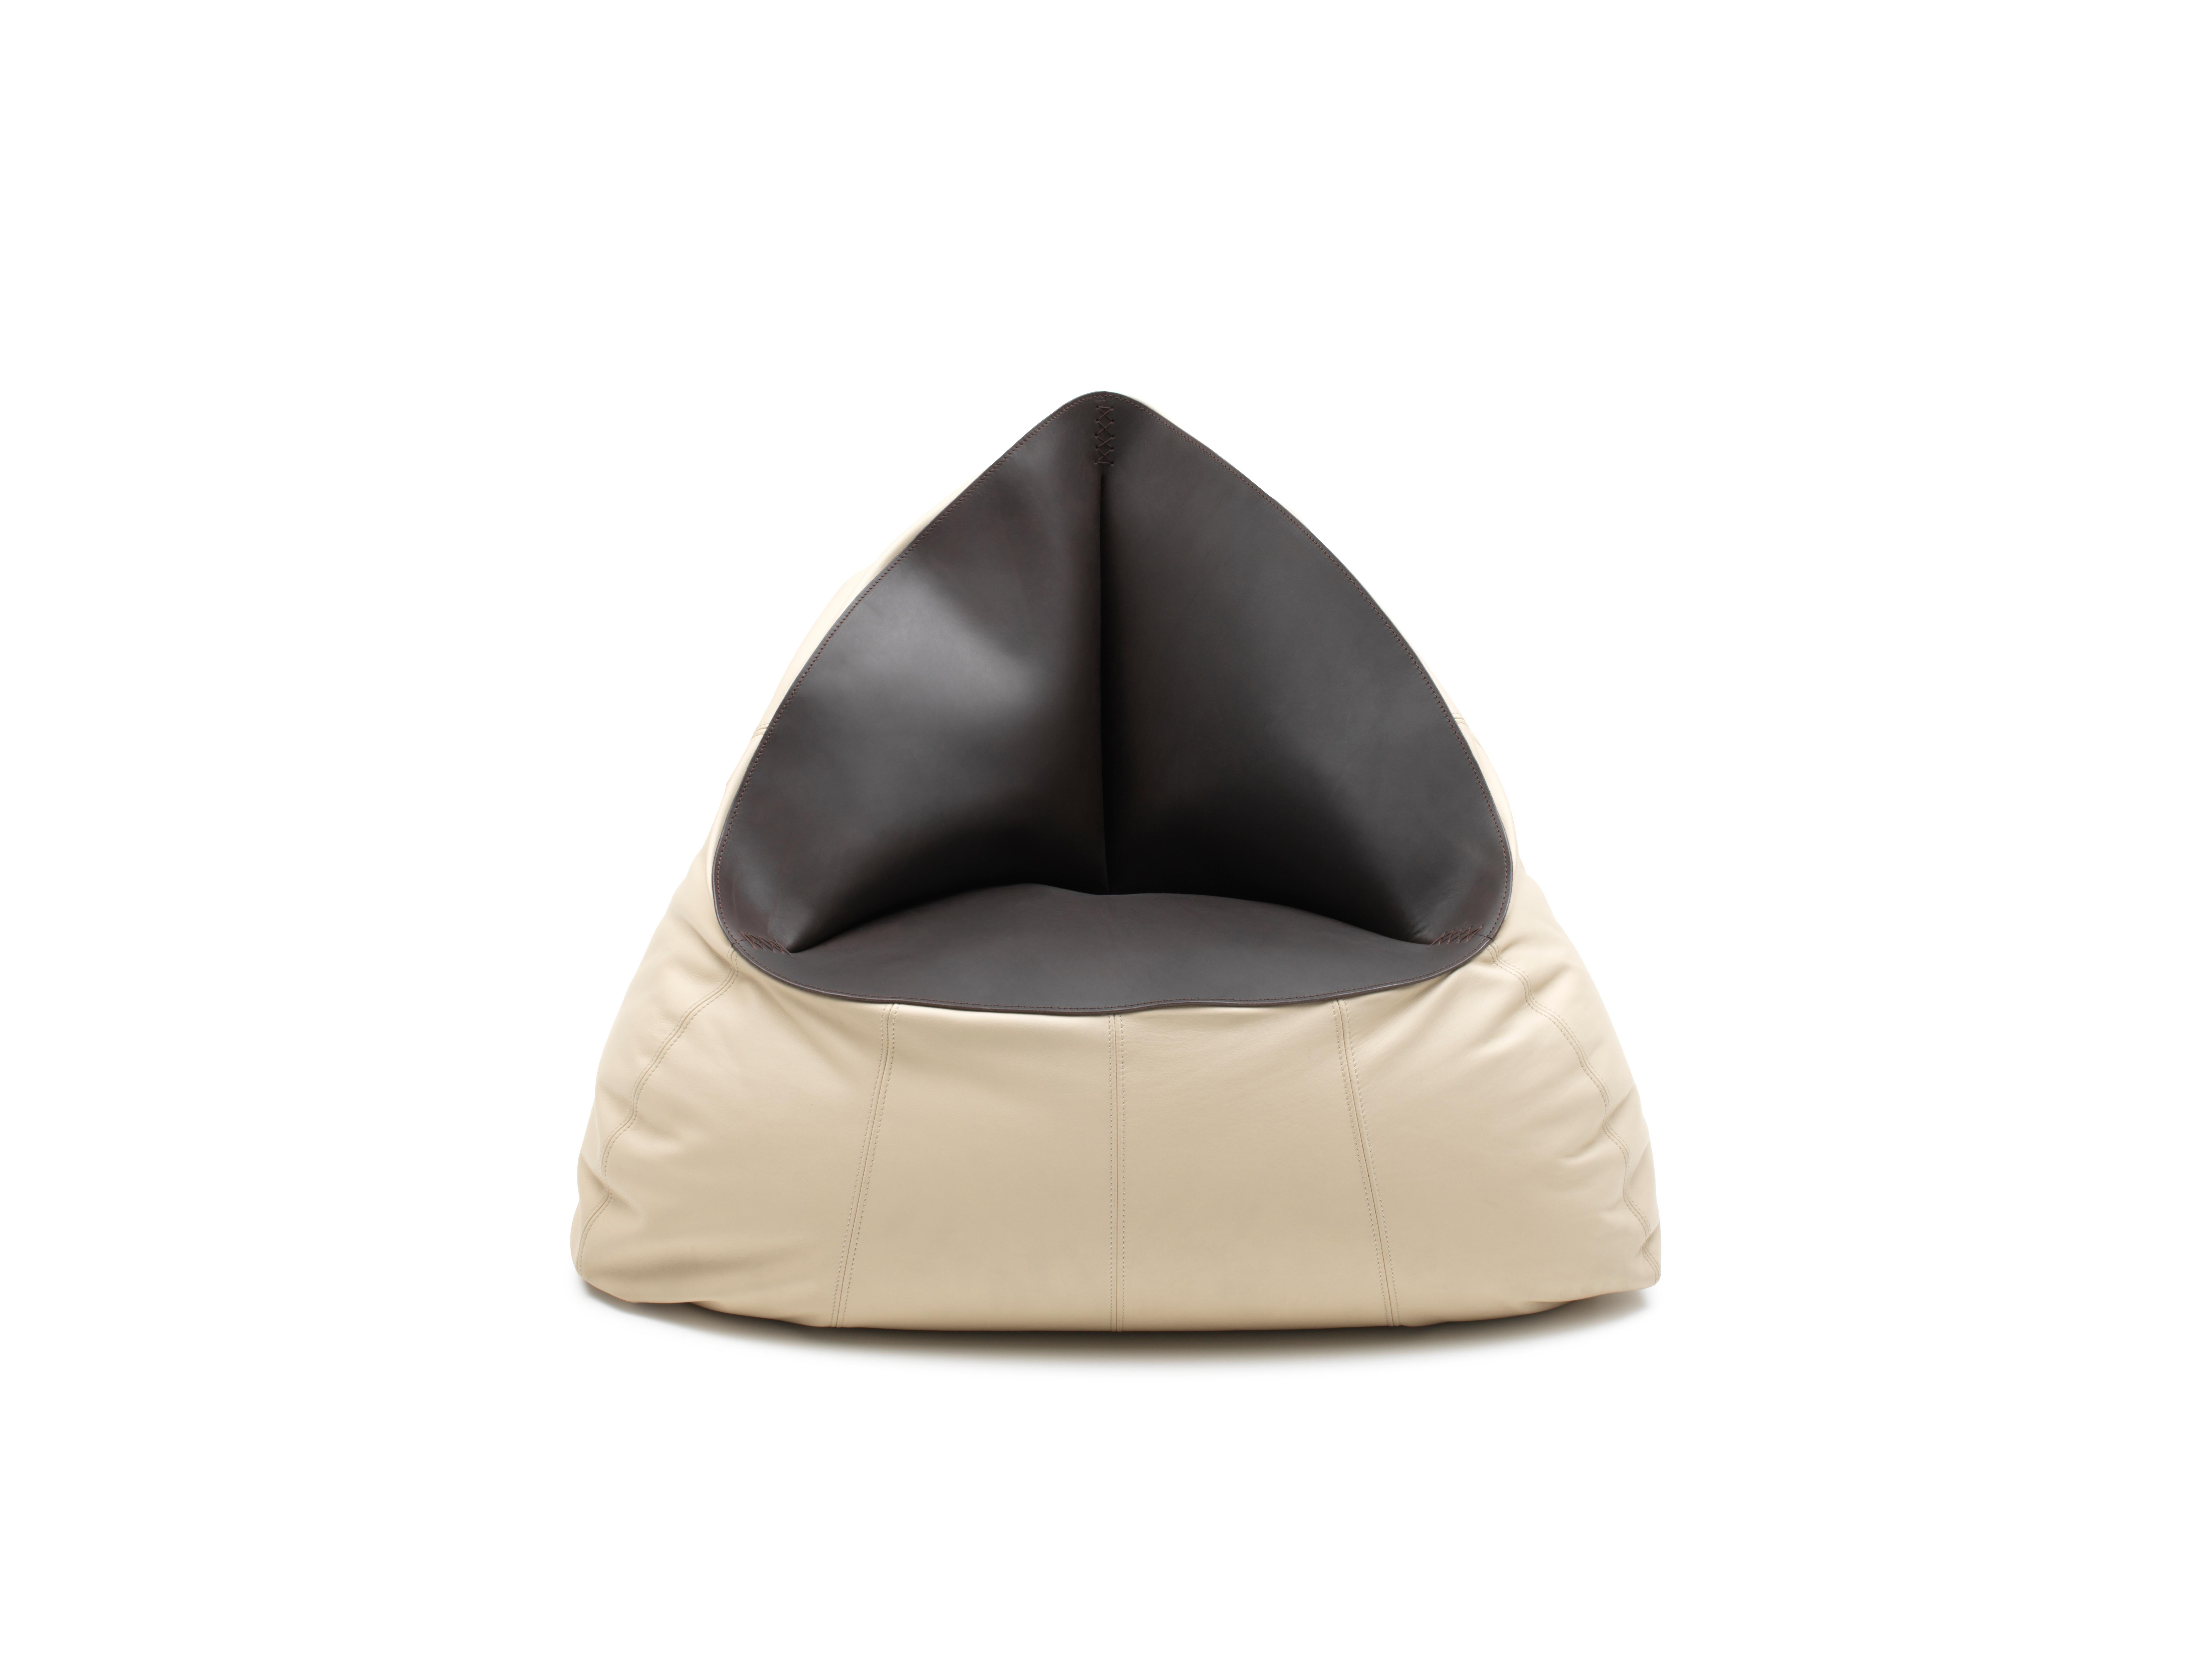 DS-9090 Beanbag Seating by De Sede
Dimensions: D 92 x W 110 x H 100 cm
Materials: leather

Prices may change according to the chosen materials and size. 

Beanbags have long been a part of the de Sede inventory, but the manufacture has now